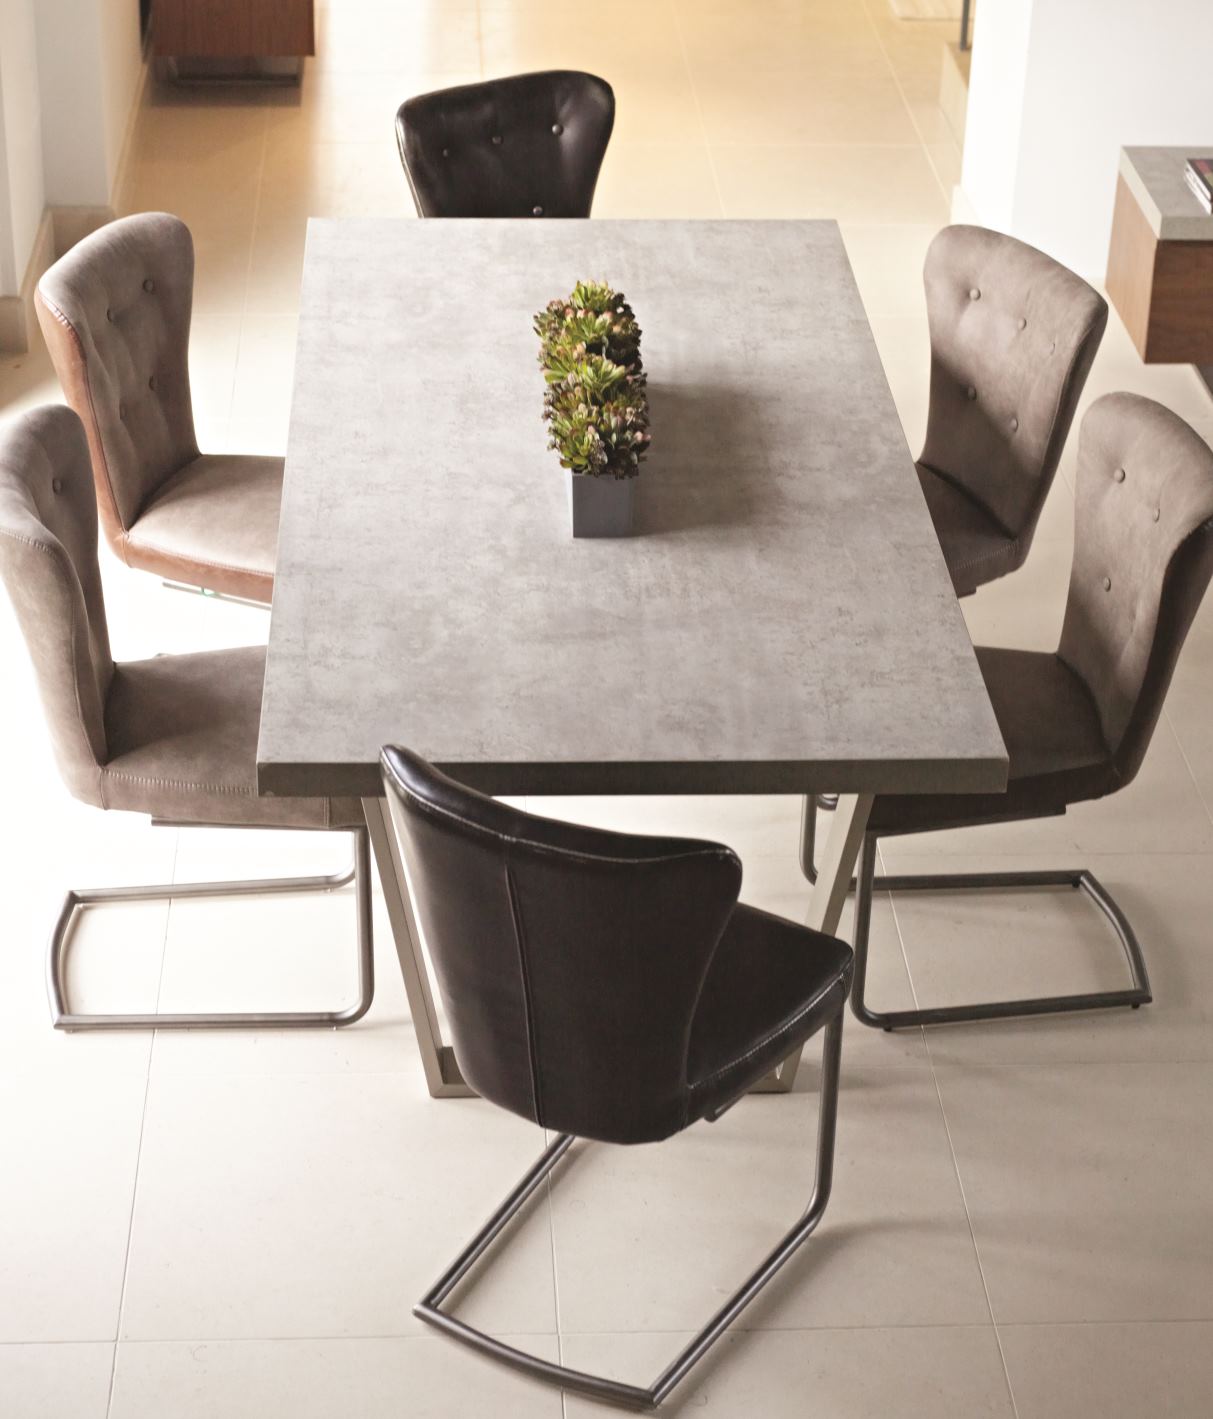 Pella Concrete Effect Extending Dining Table & 6 Chairs | George Street ...